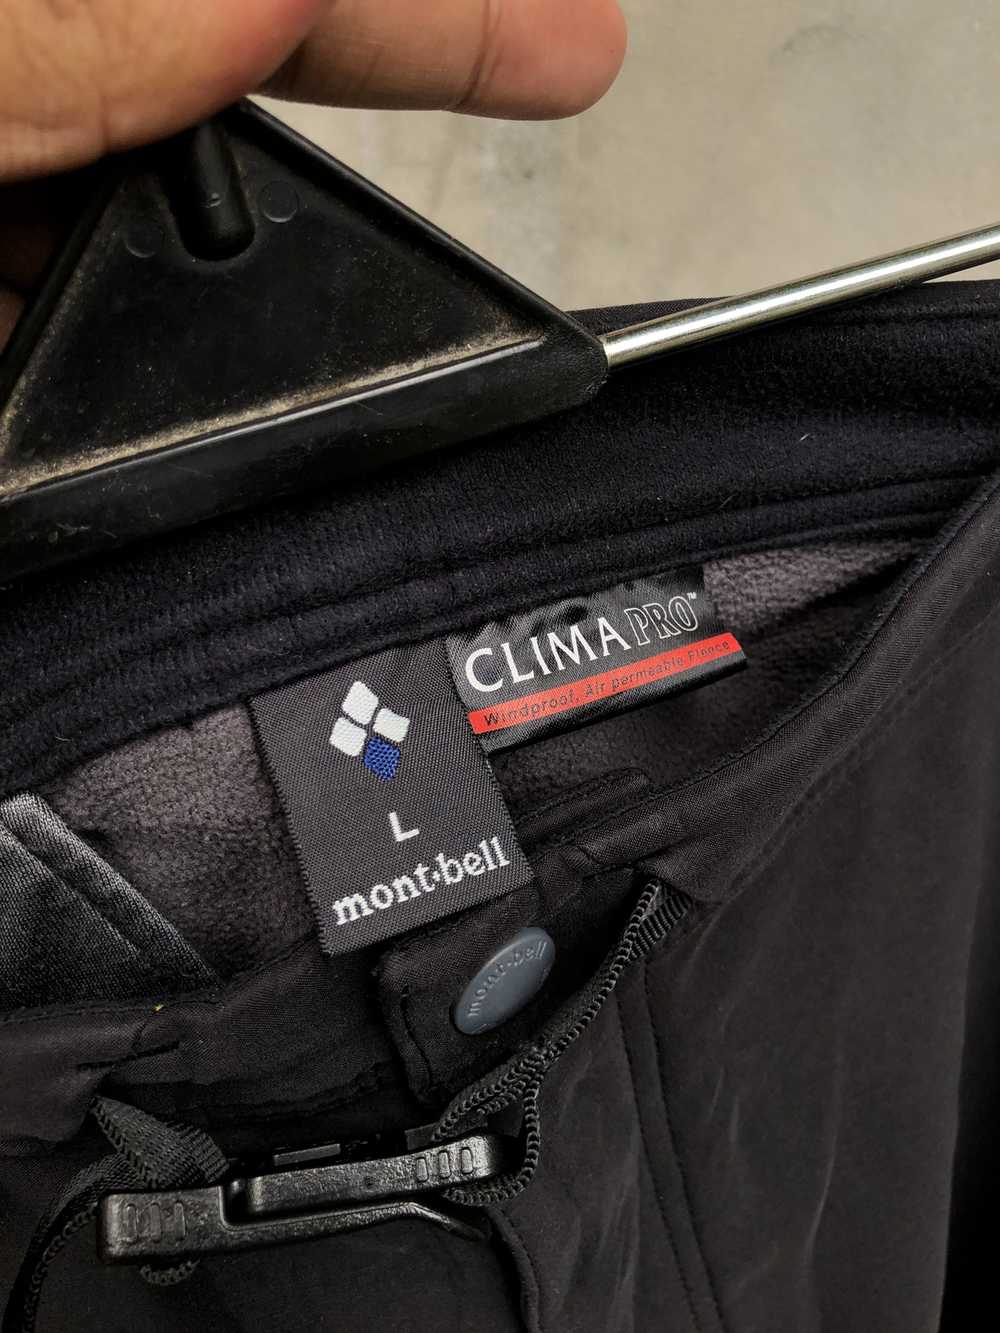 Montbell × Outdoor Life Montbell clima pro pants - image 6